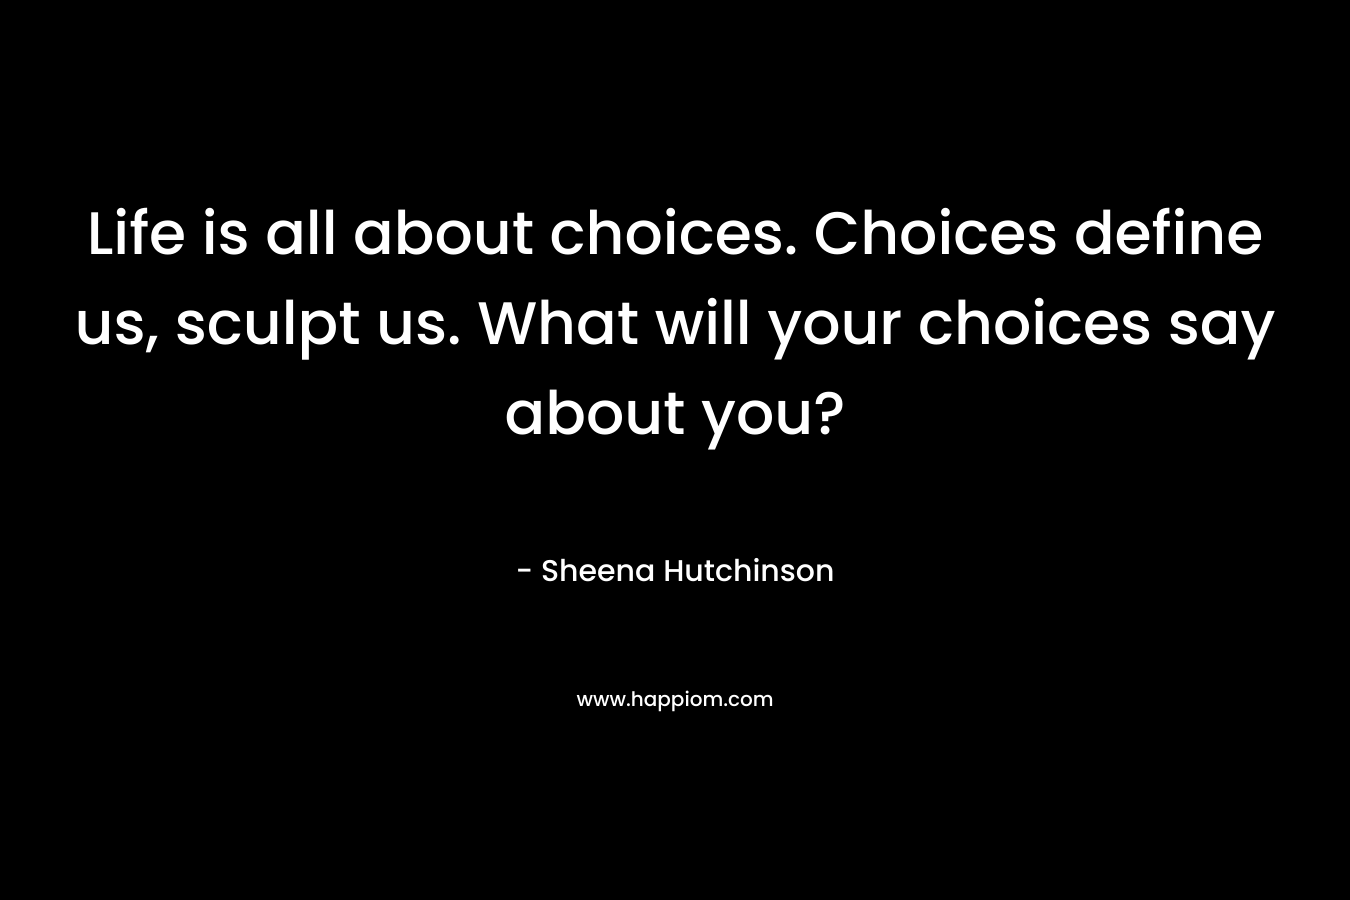 Life is all about choices. Choices define us, sculpt us. What will your choices say about you?